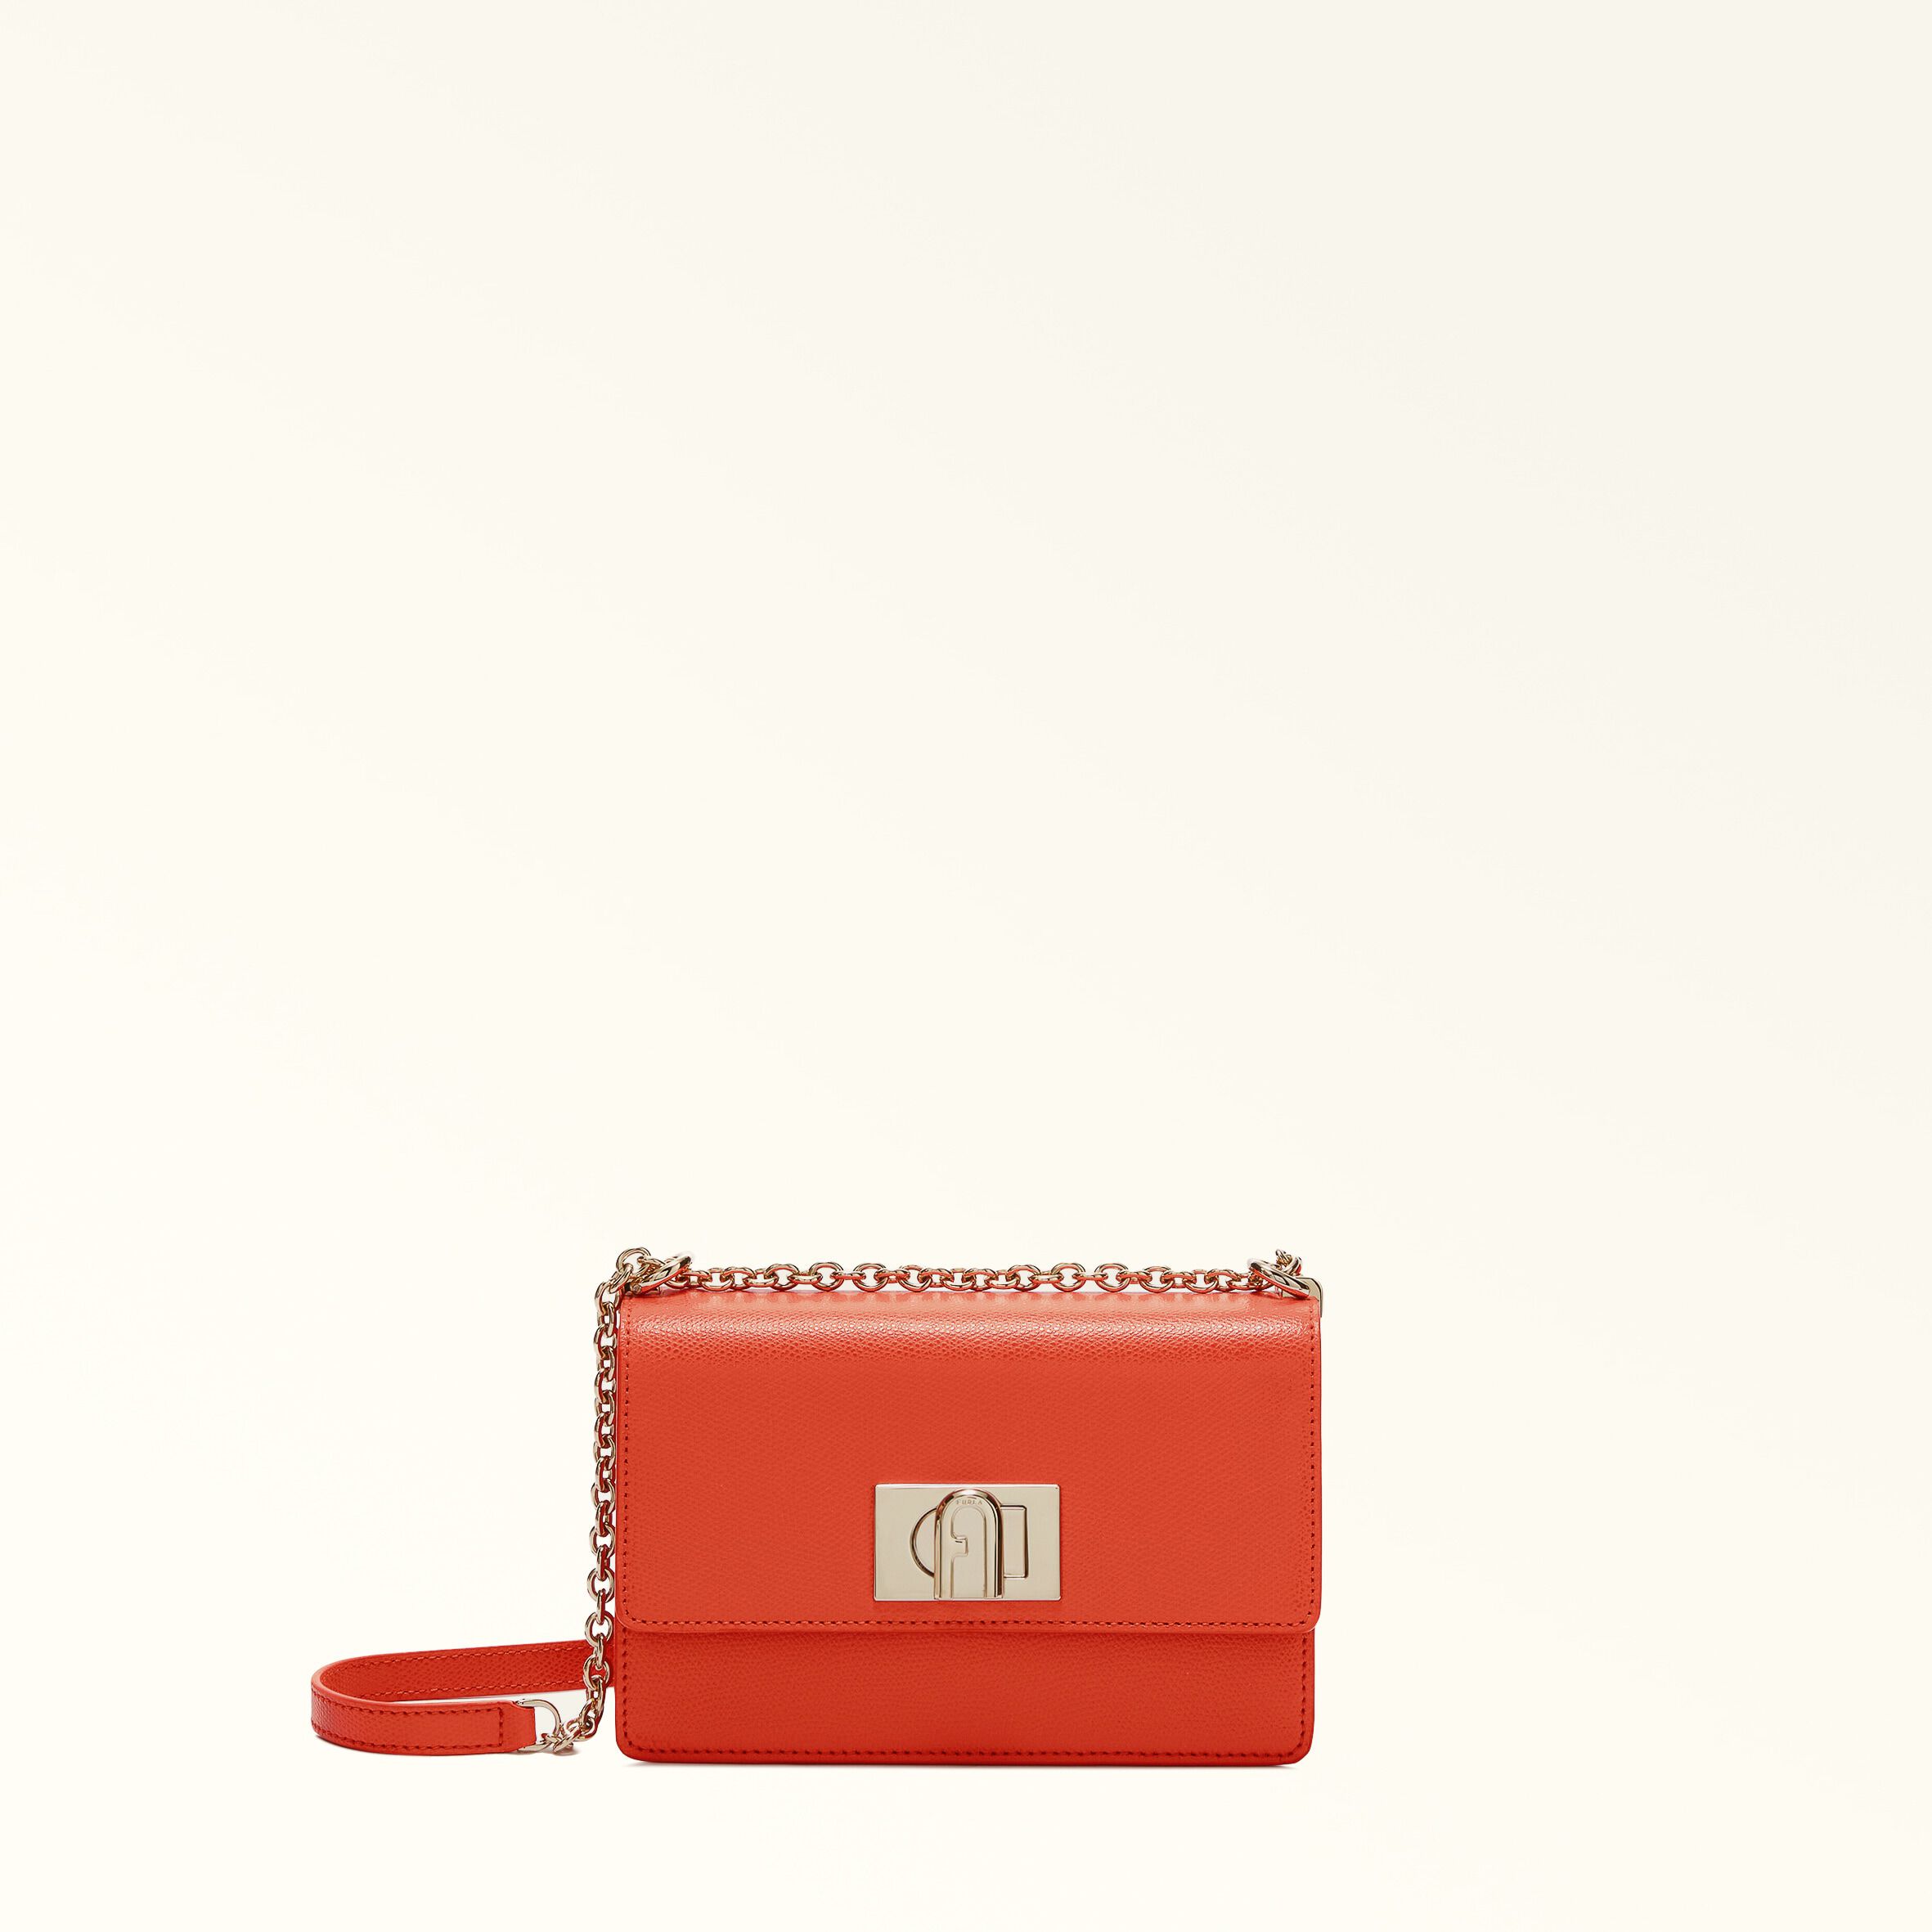 Women's bags, wallets, shoes and accessories | Furla